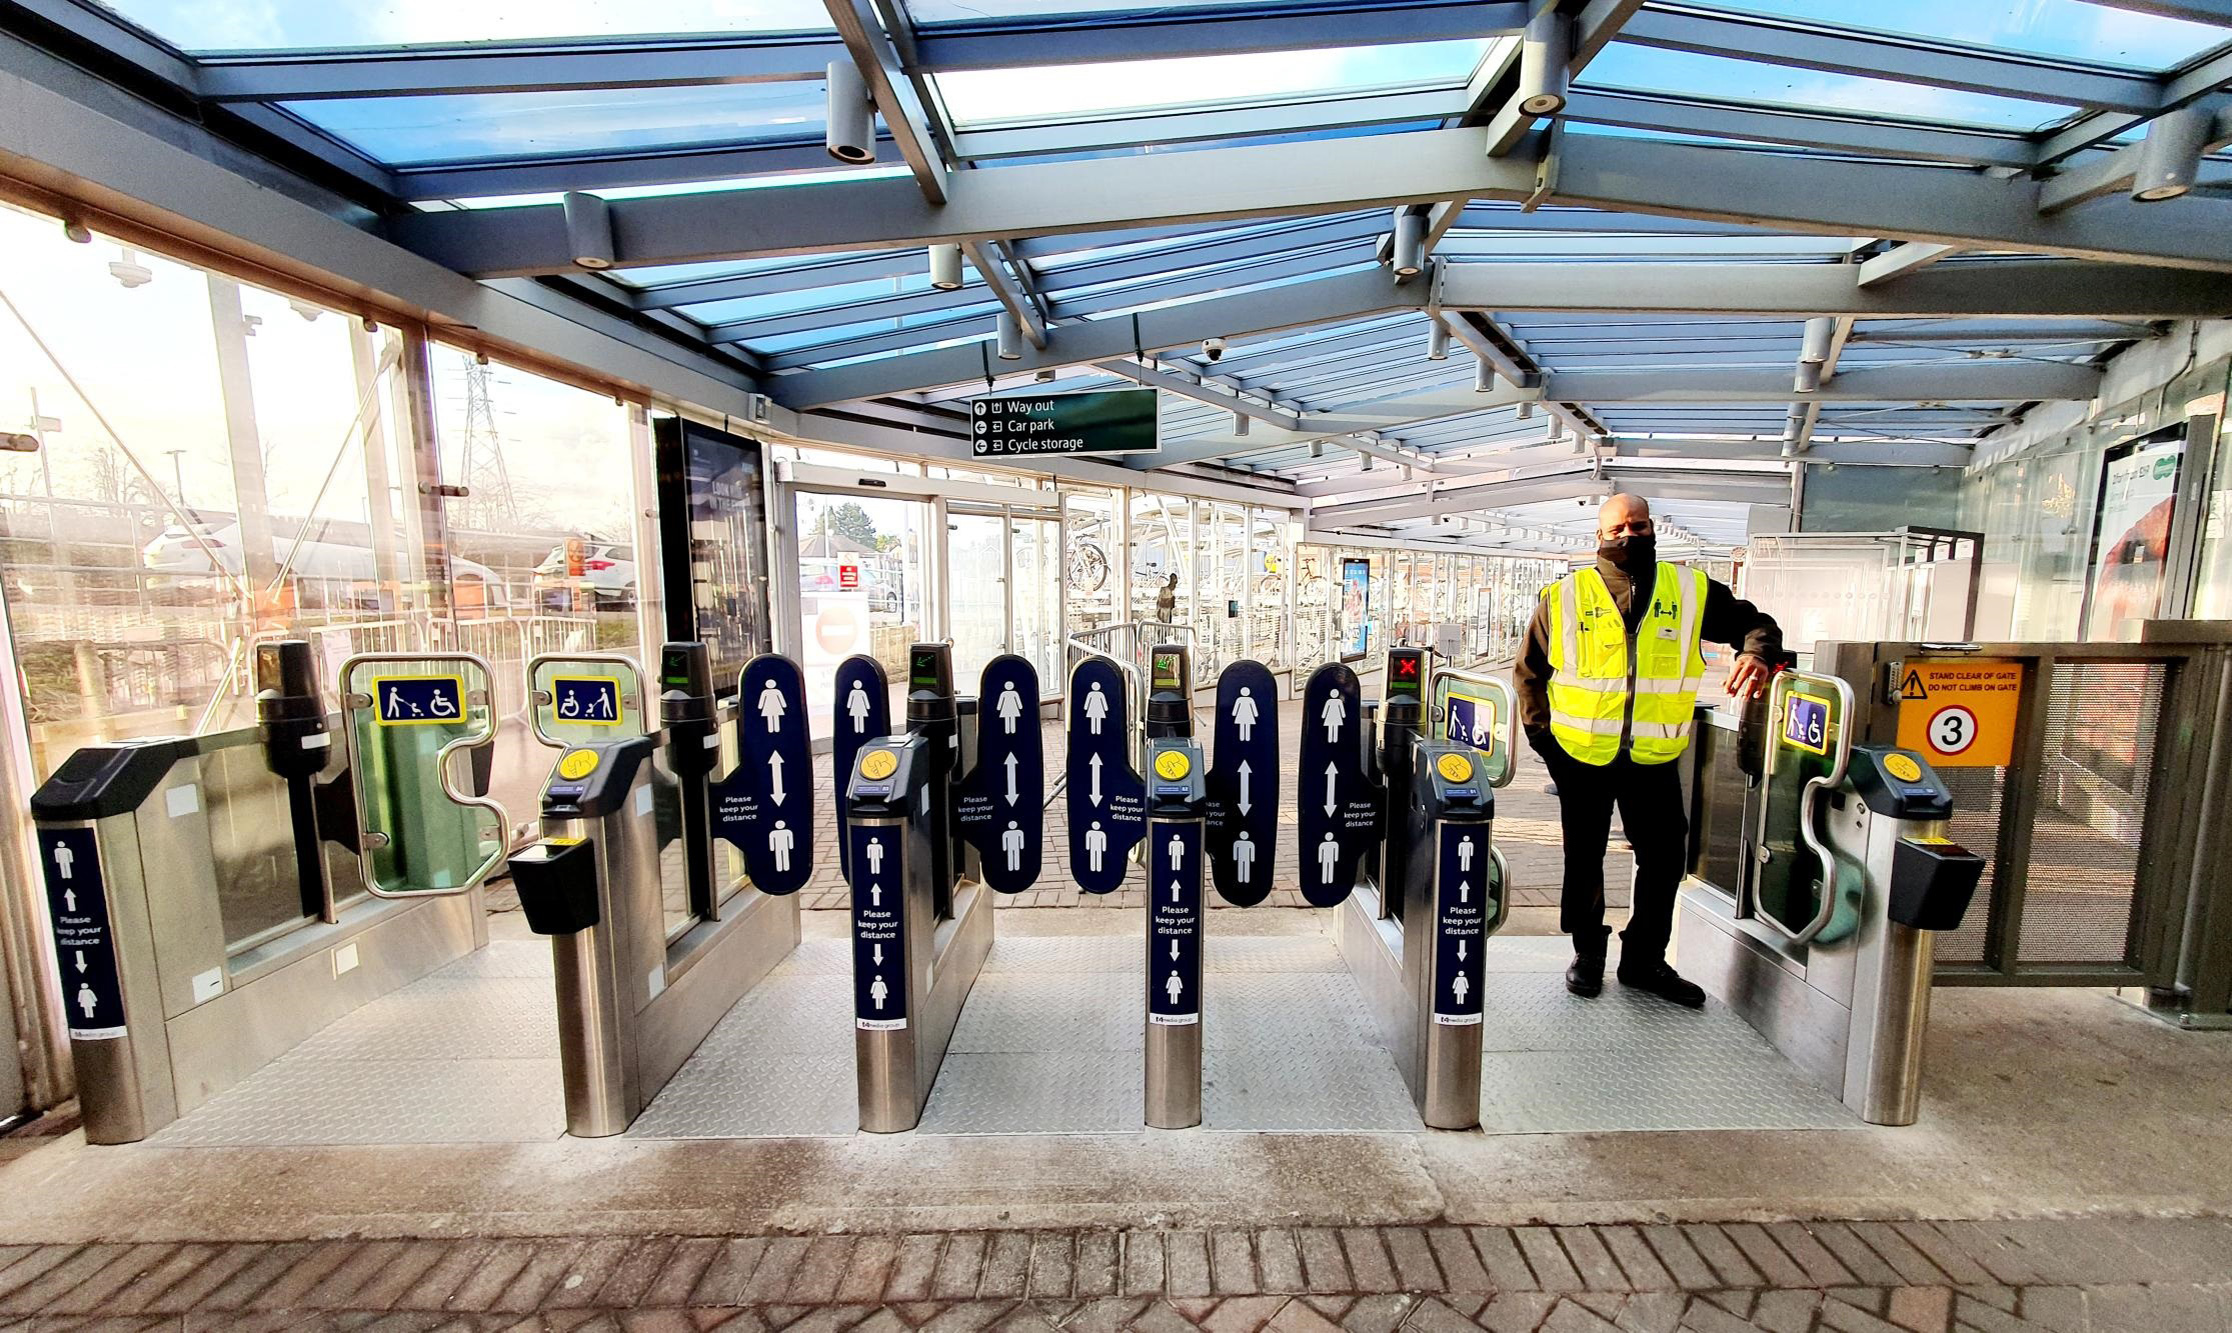 Better access - Three Bridges has an additional gate wide enough for wheelchair users and those with buggies